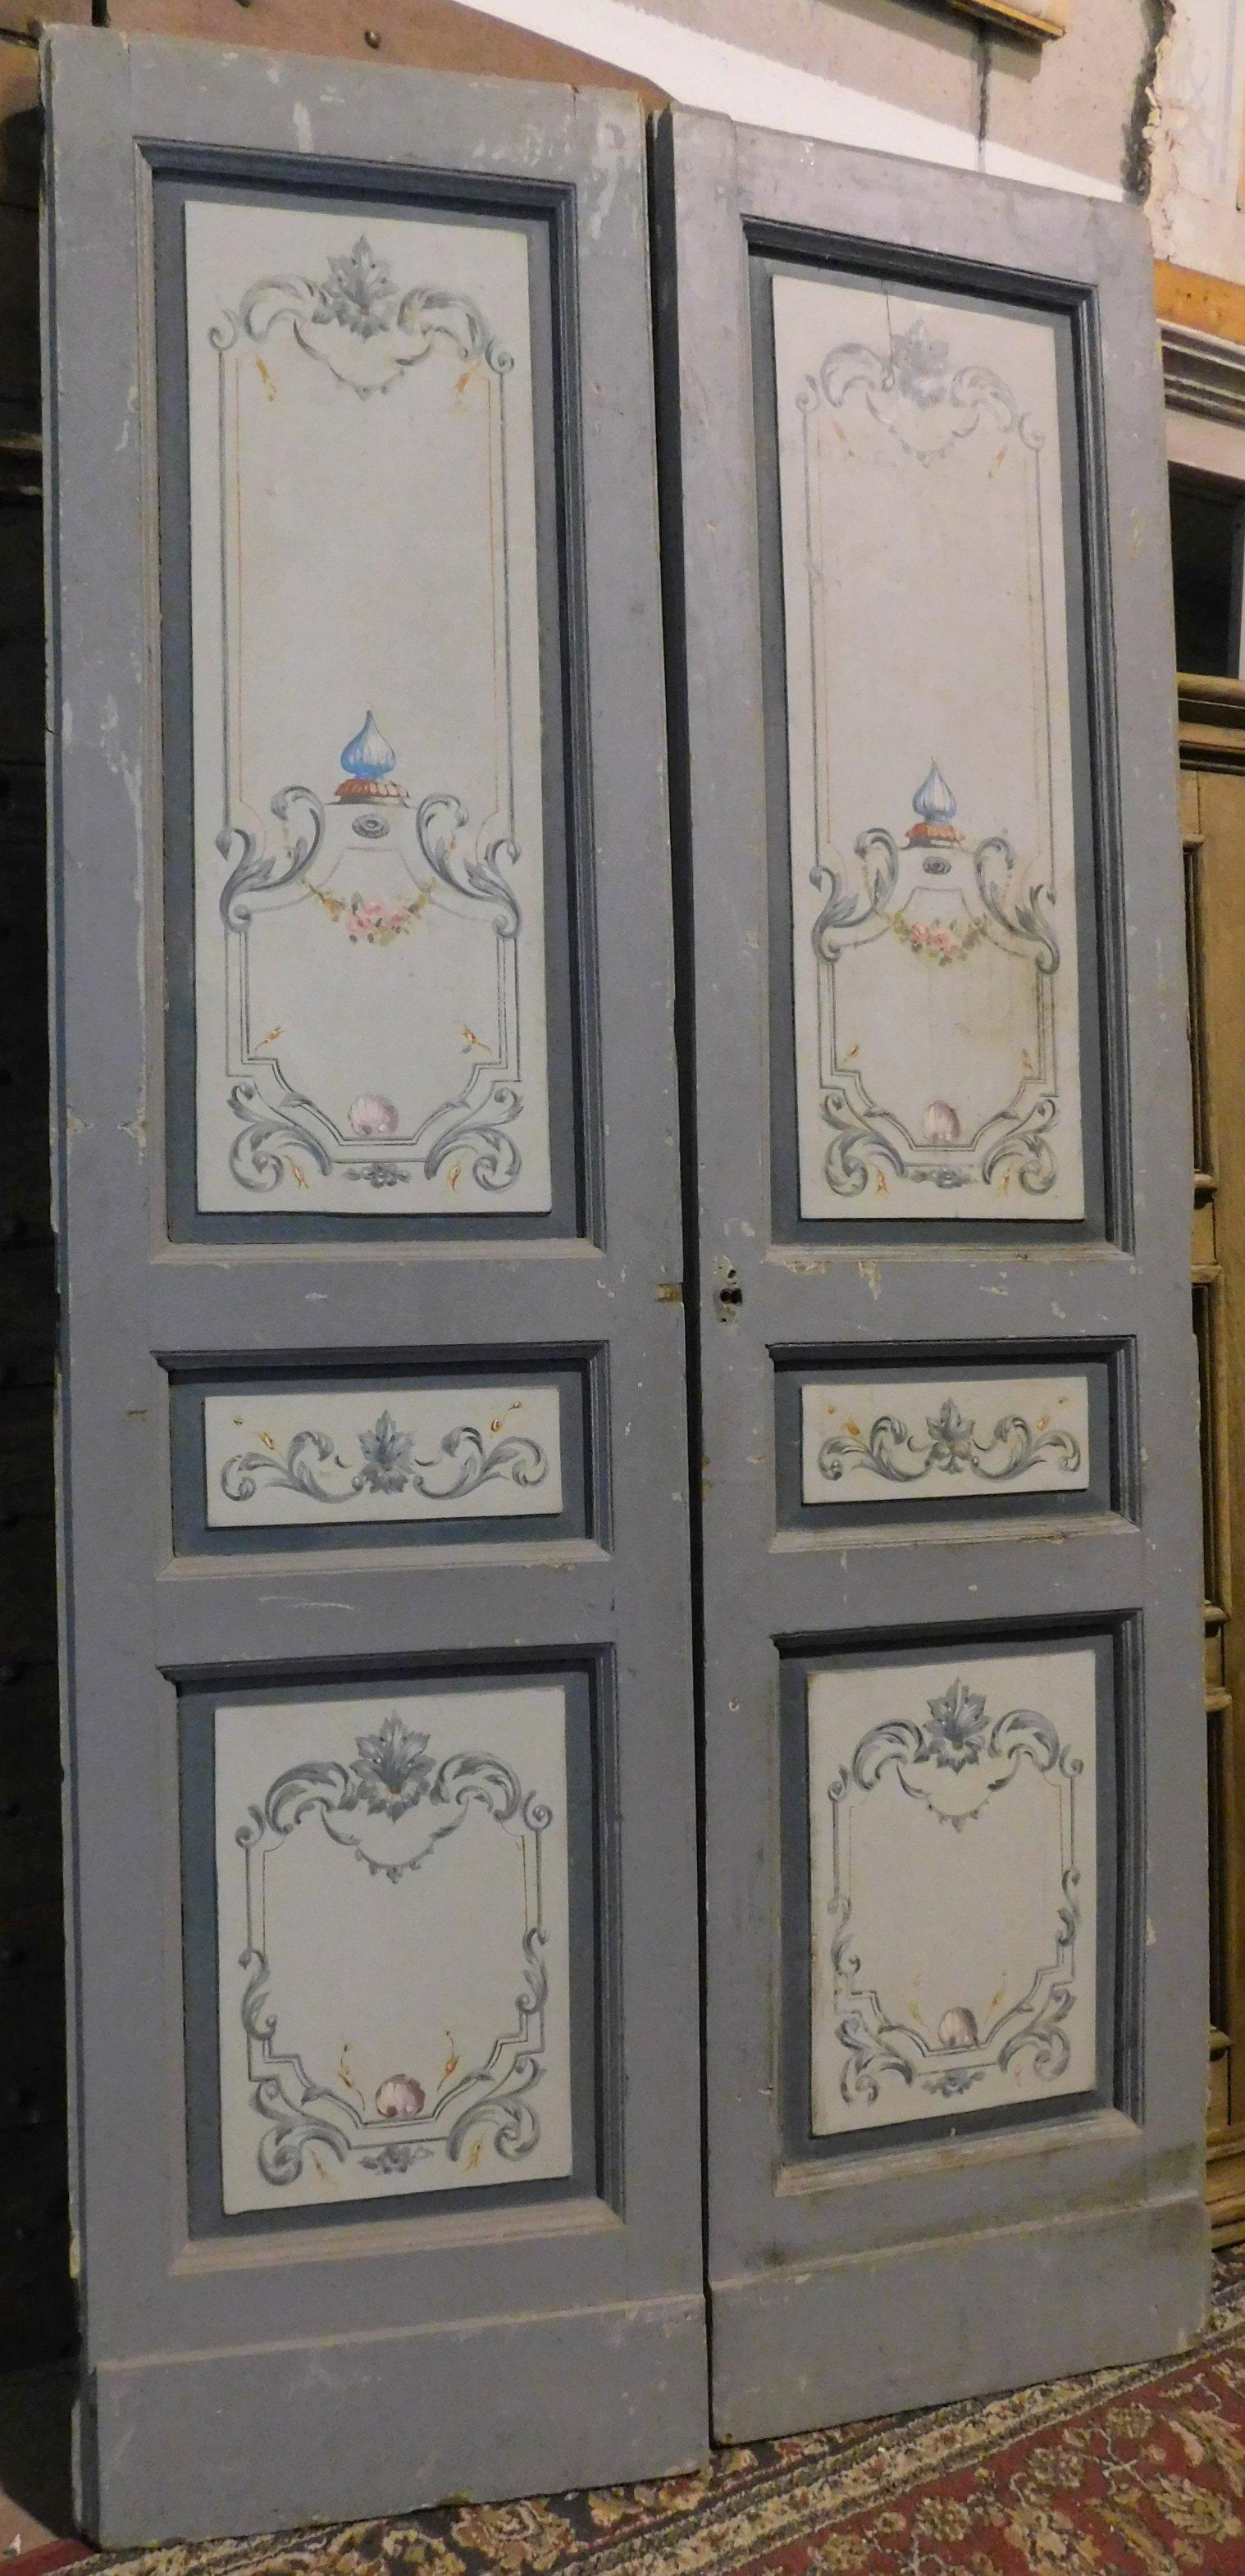 Antique double interior door, painted with typical decorations of the time on a gray-blue background, white back, hand-built in the middle of the 19th century in Italy.
The height can be used perhaps in industrial interiors, as a door (also